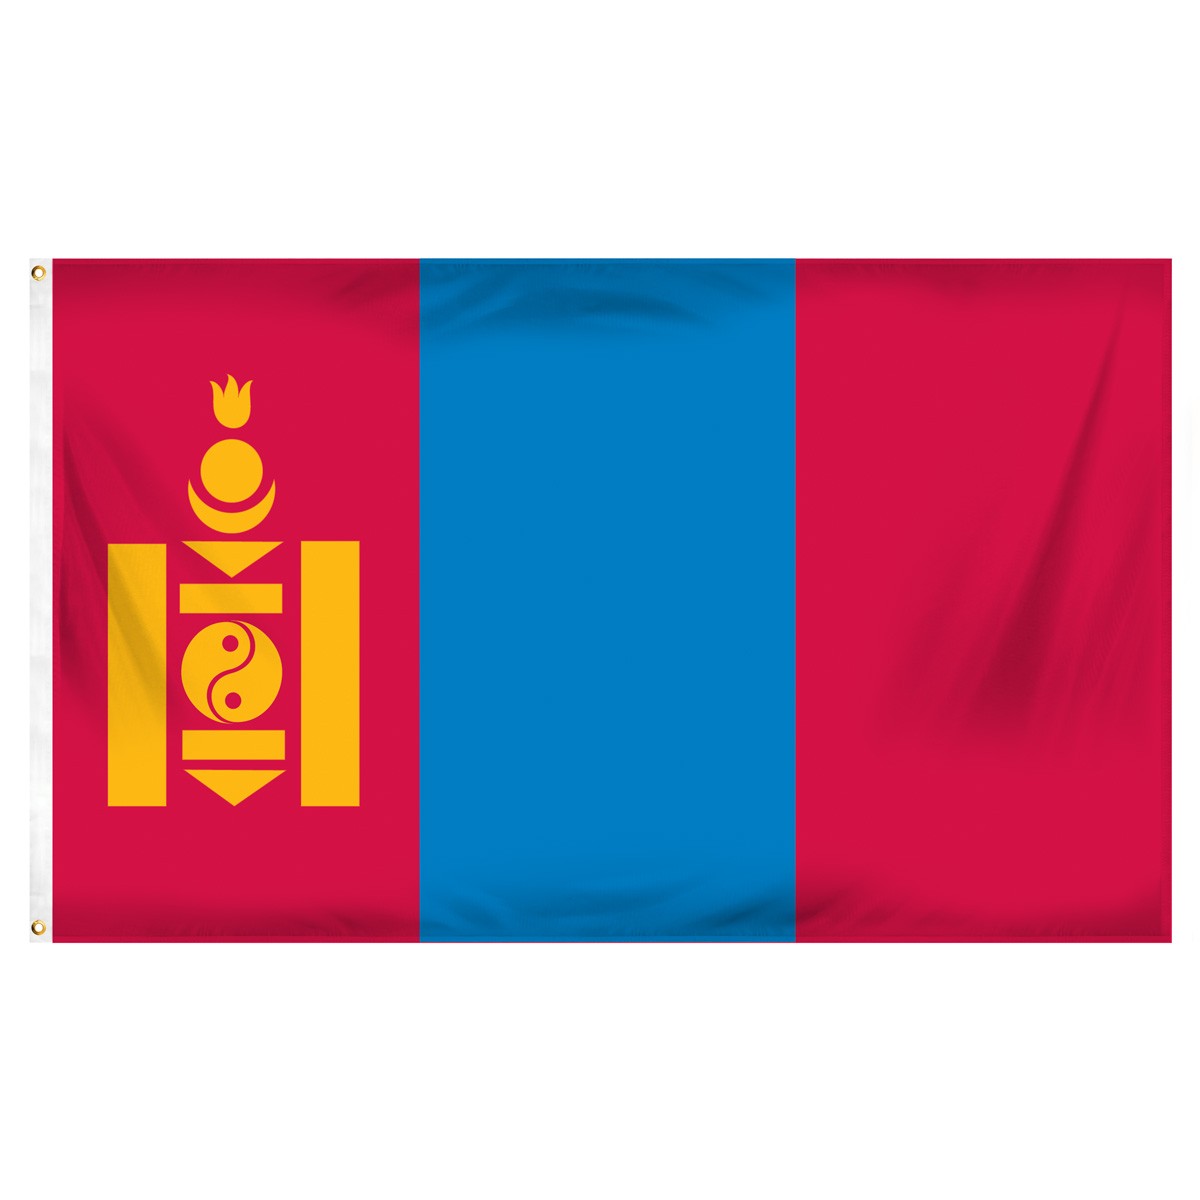 Mongolia Posters and Banners